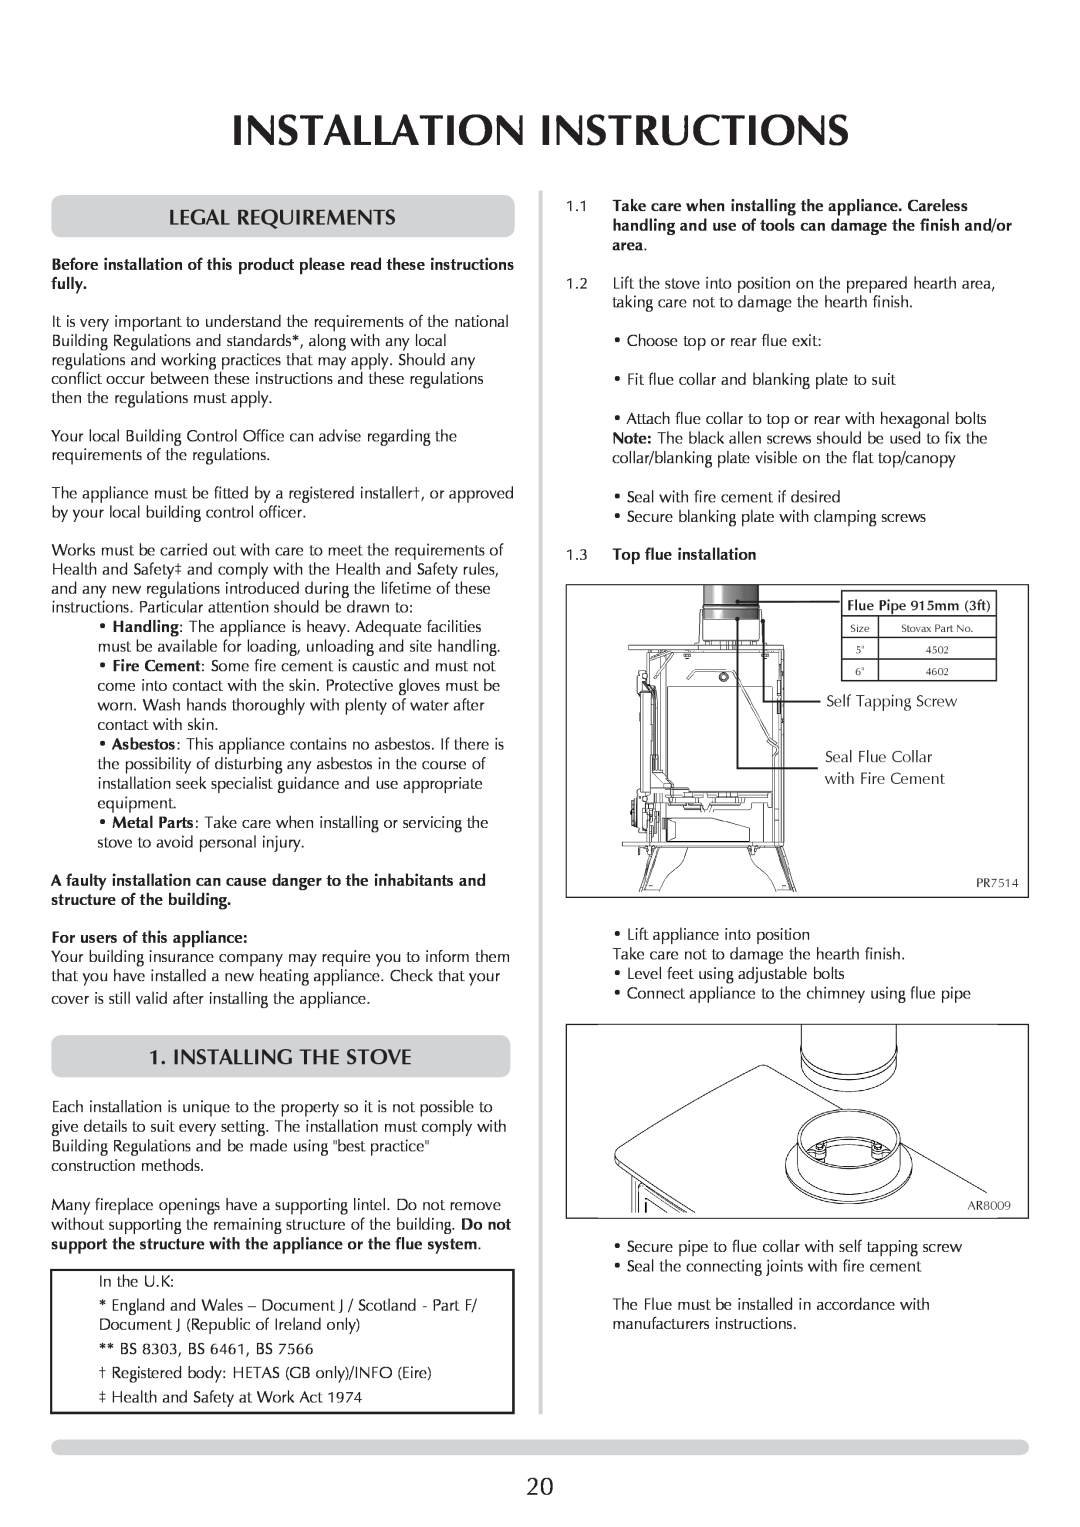 Yeoman YM-W9001FL manual Installation Instructions, Legal requirements, Installing The Stove, For users of this appliance 